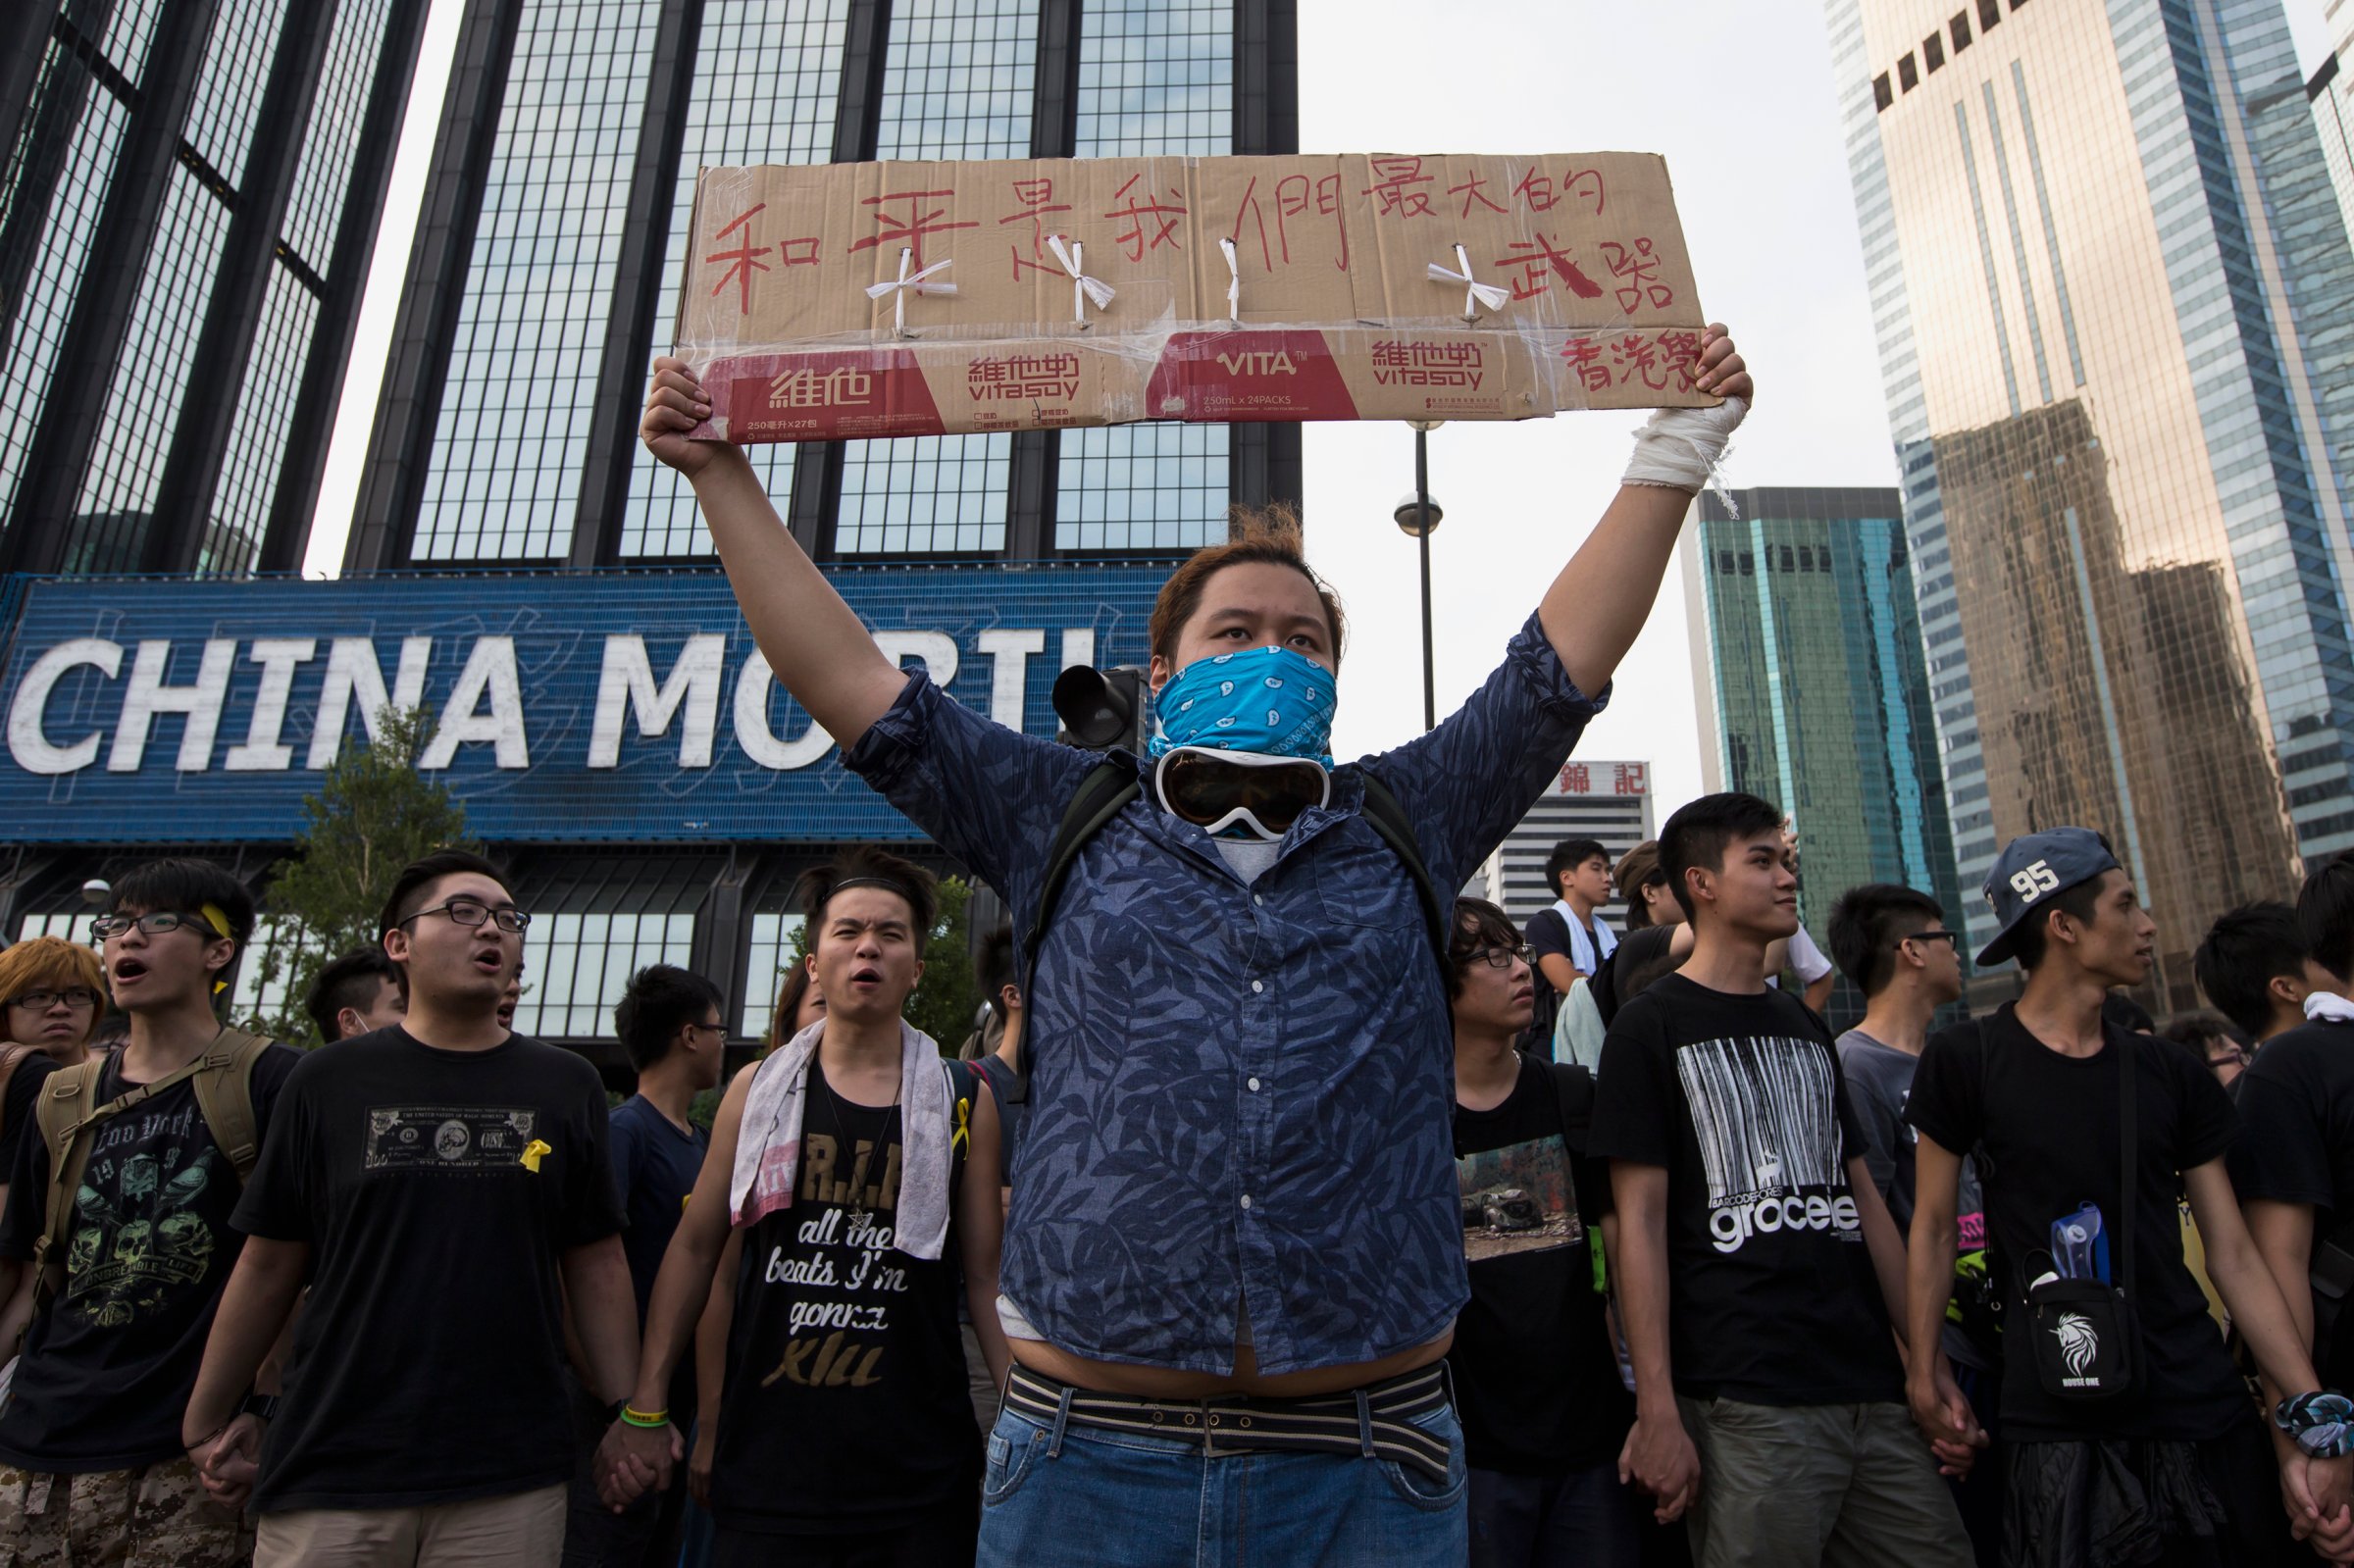 A protester holds up a placard which reads "Peace is our greatest weapon", outside the venue of the official flag-raising ceremony for celebrations of China's National Day, in Hong Kong